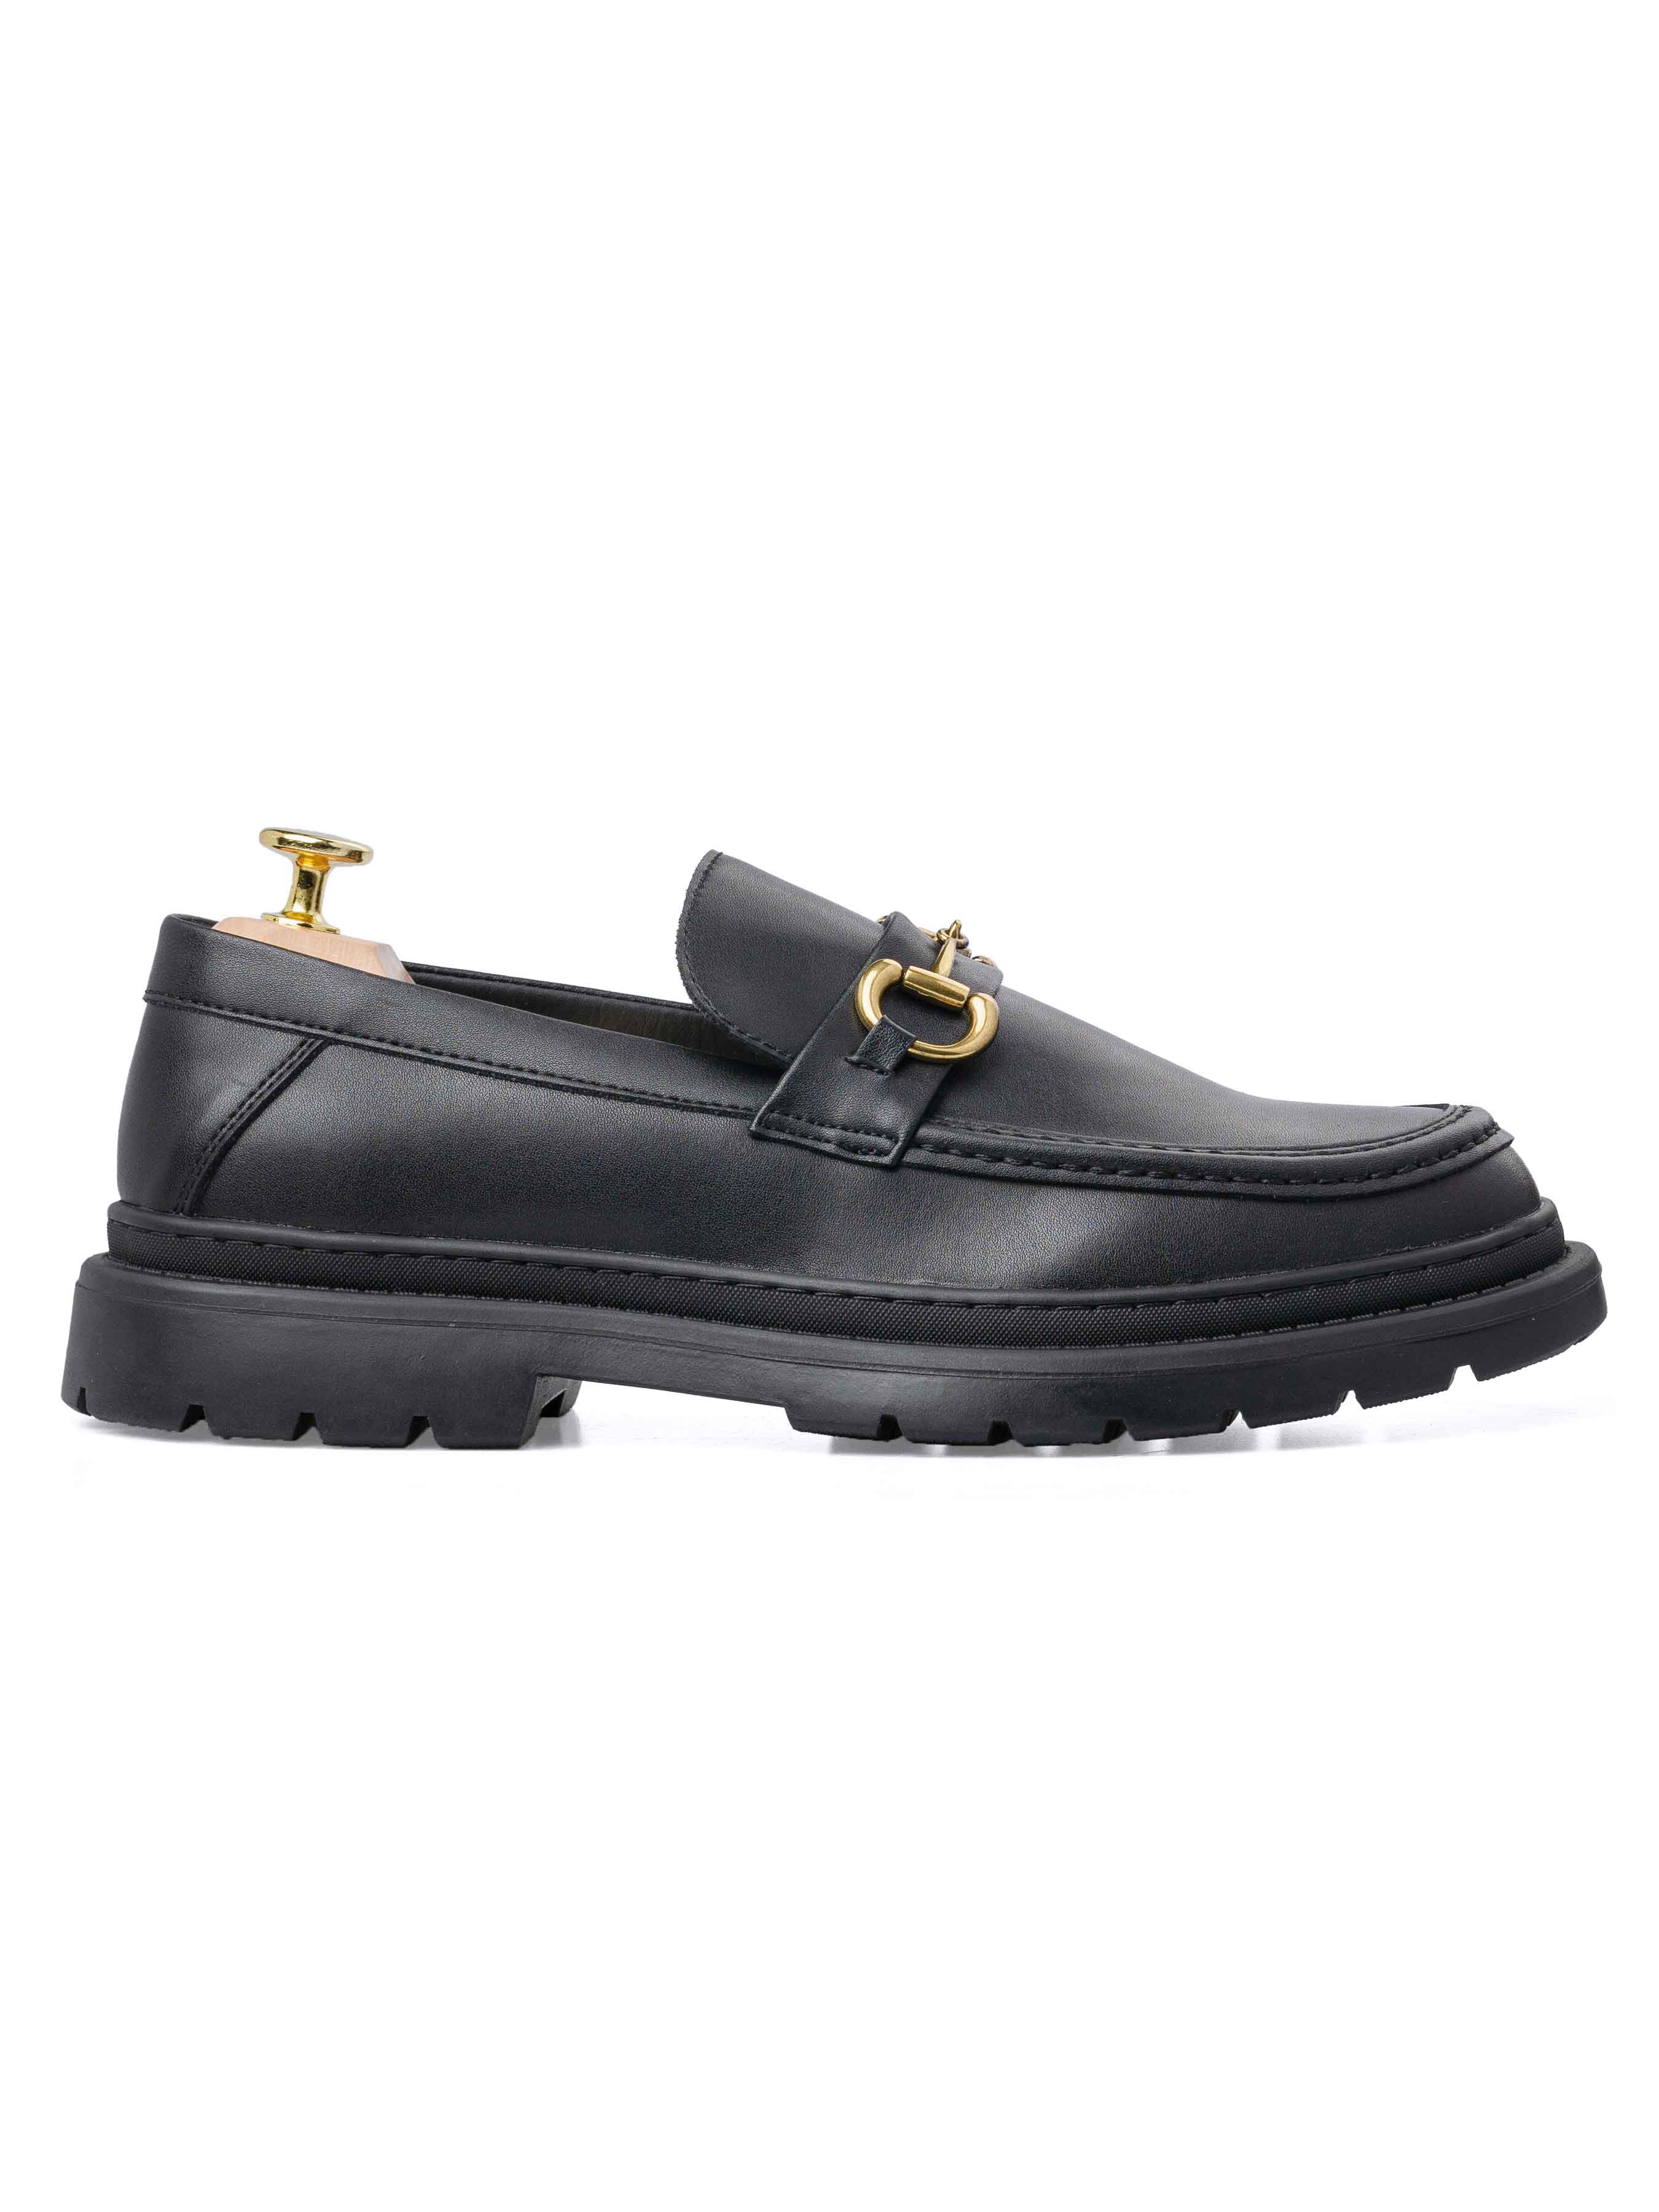 Maurice Moccasin Buckle Loafer - Solid Black (Chunky Sole)